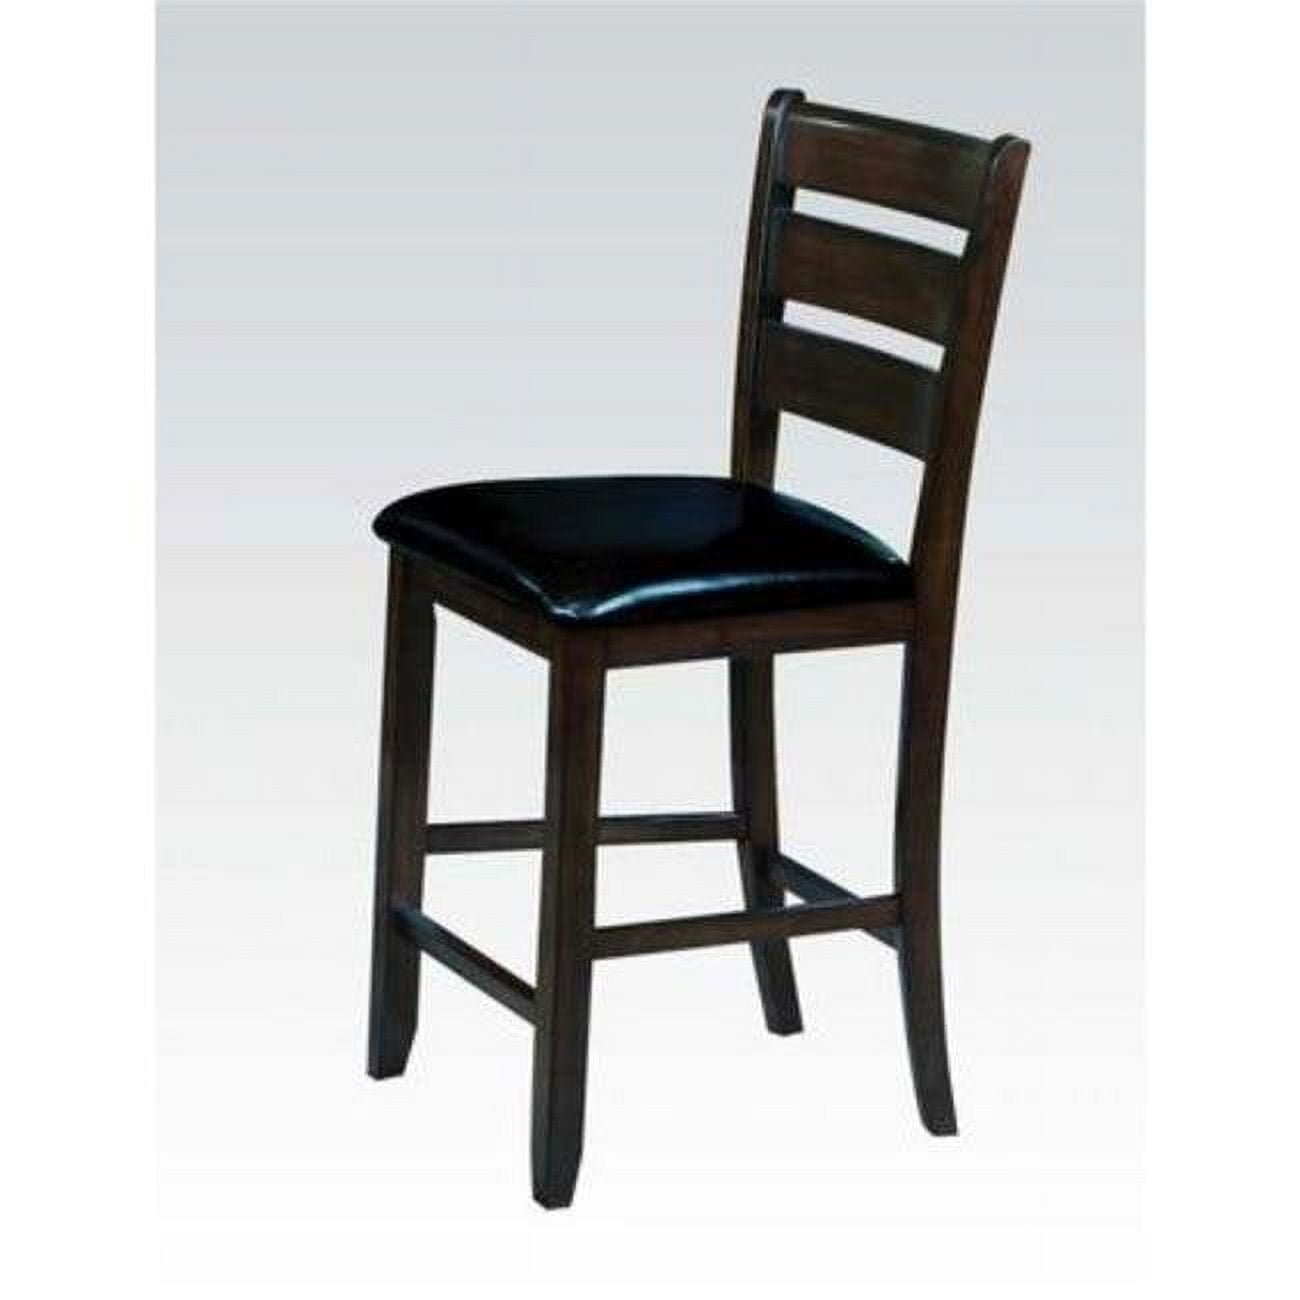 Picture of Benzara BM186229 Wooden Counter Height Chair with Leatherette seat  Set of 2  Black and Brown - 41 x 21.2 x  34